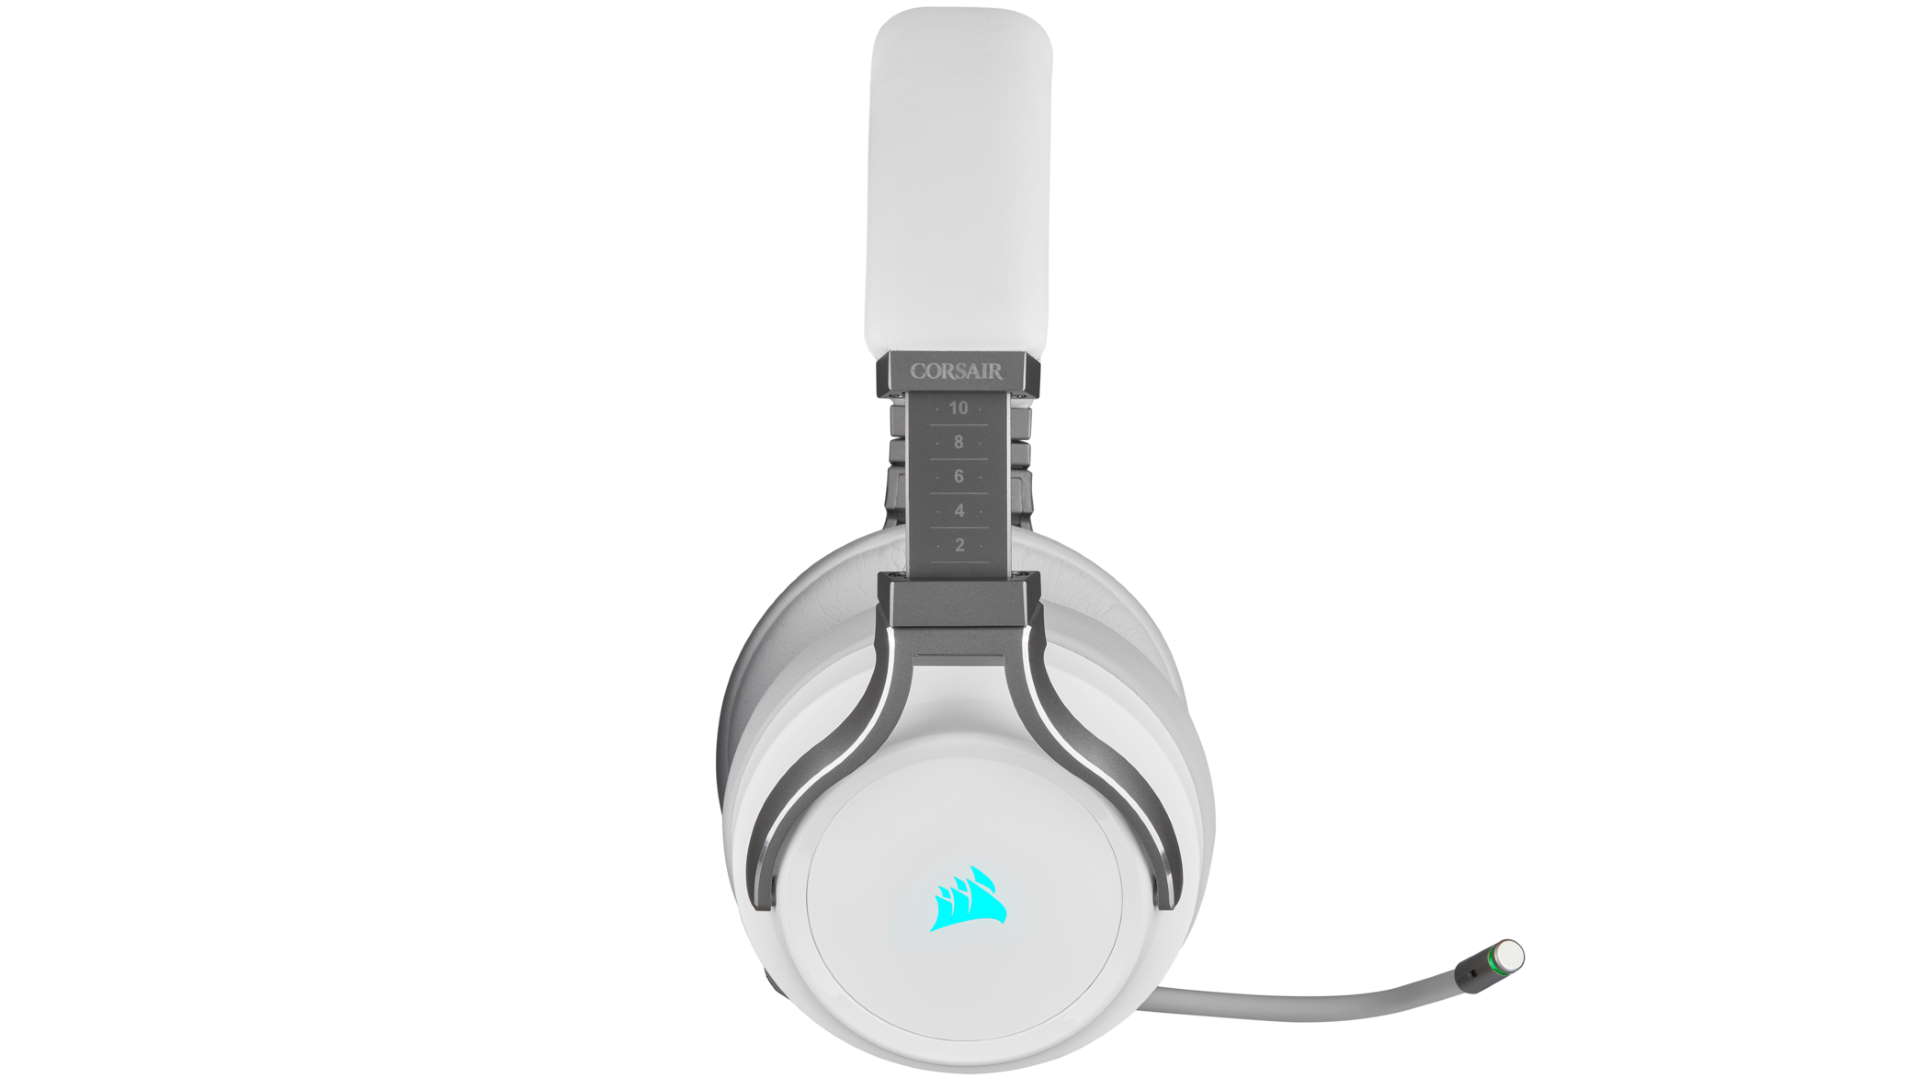 Corsair Virtuoso Pro review: A killer headset for gamers and